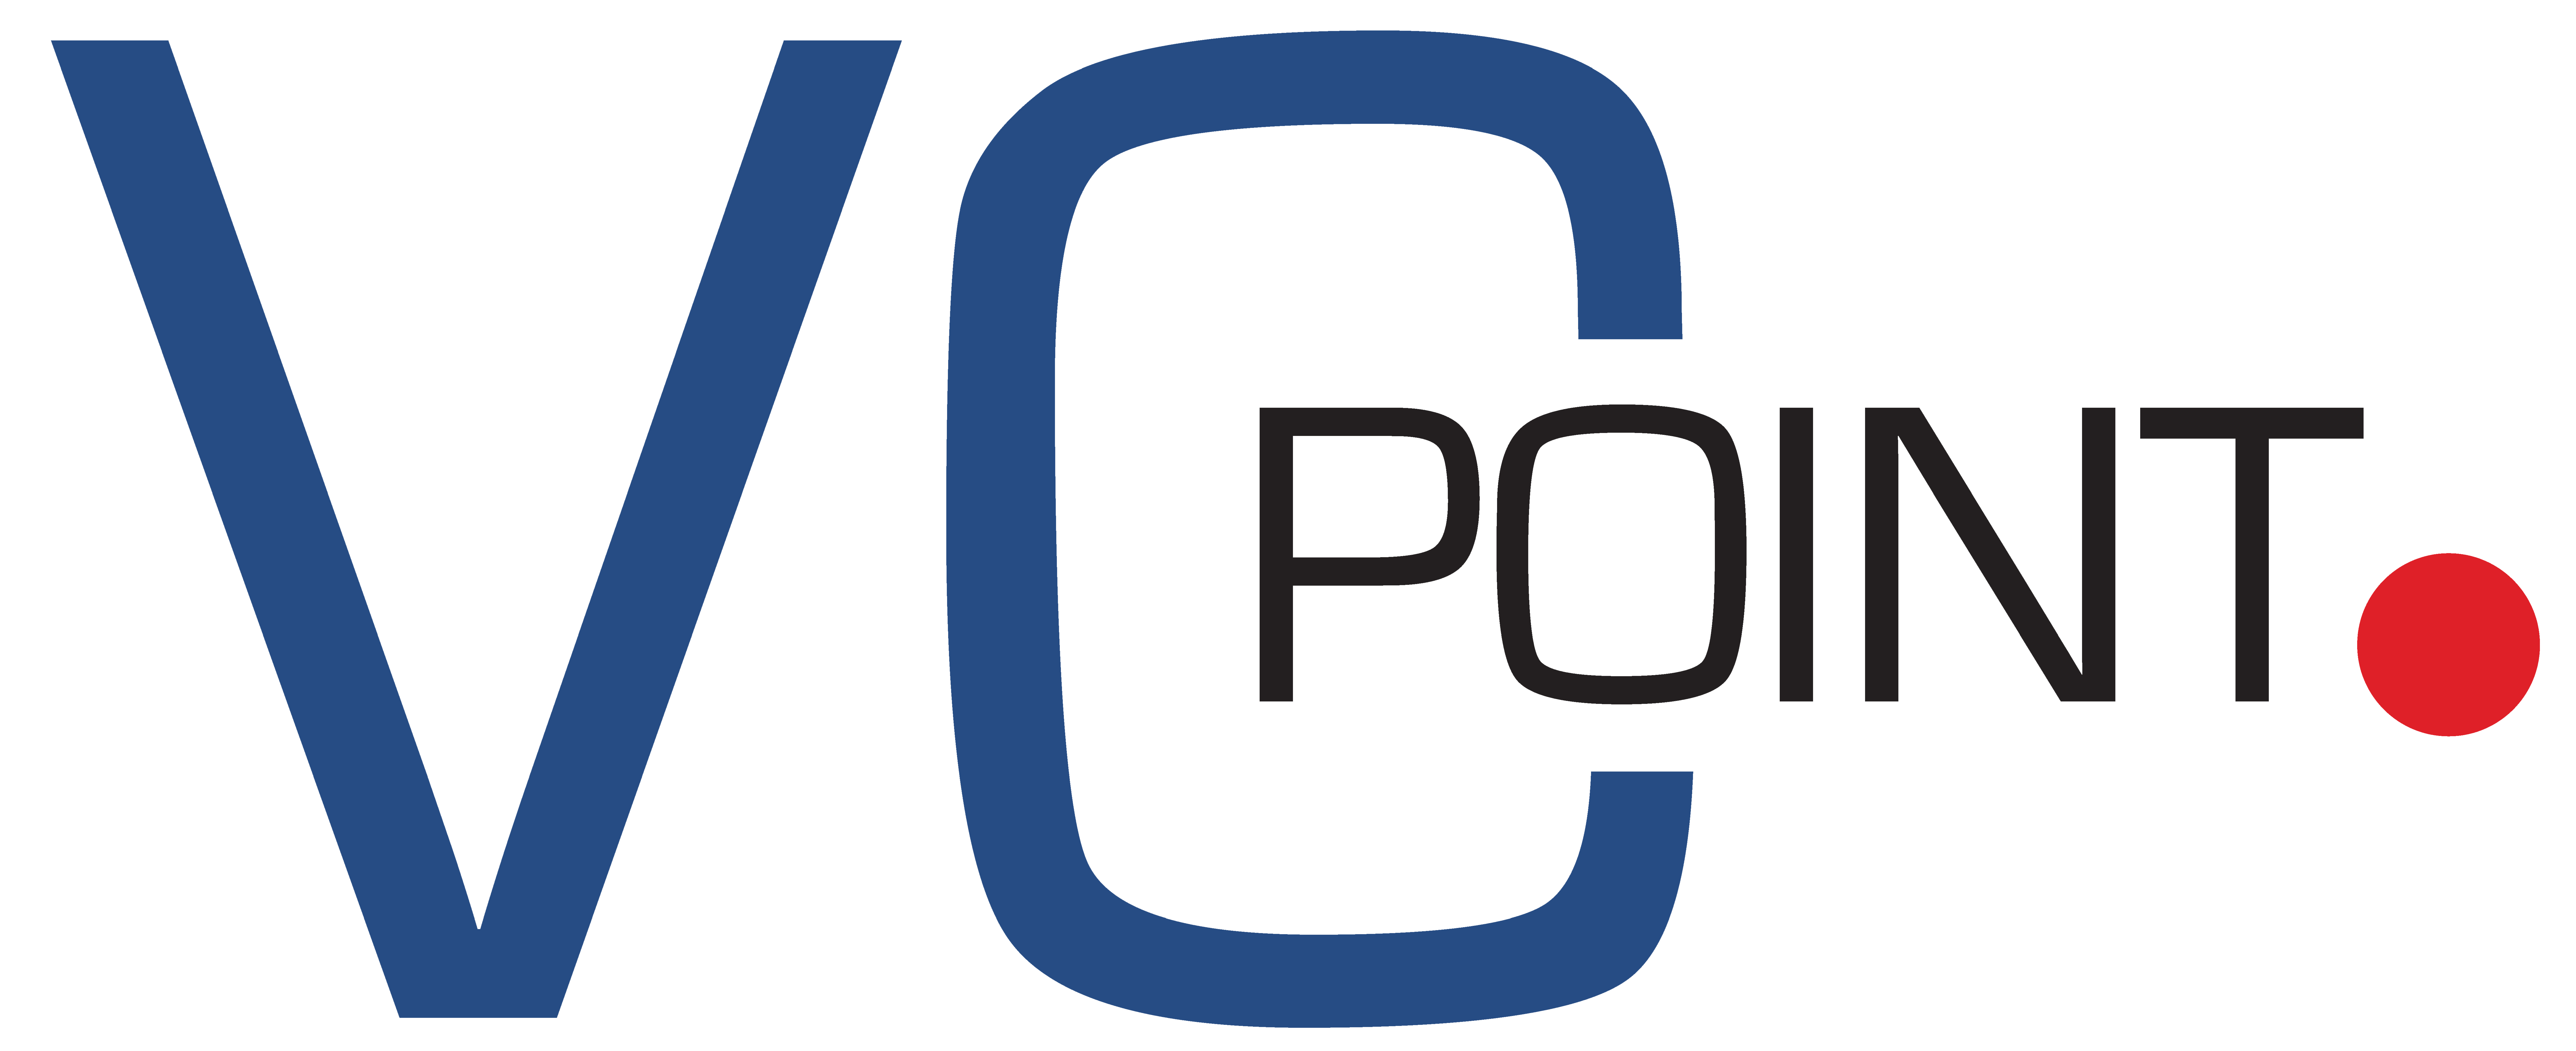 VC Point